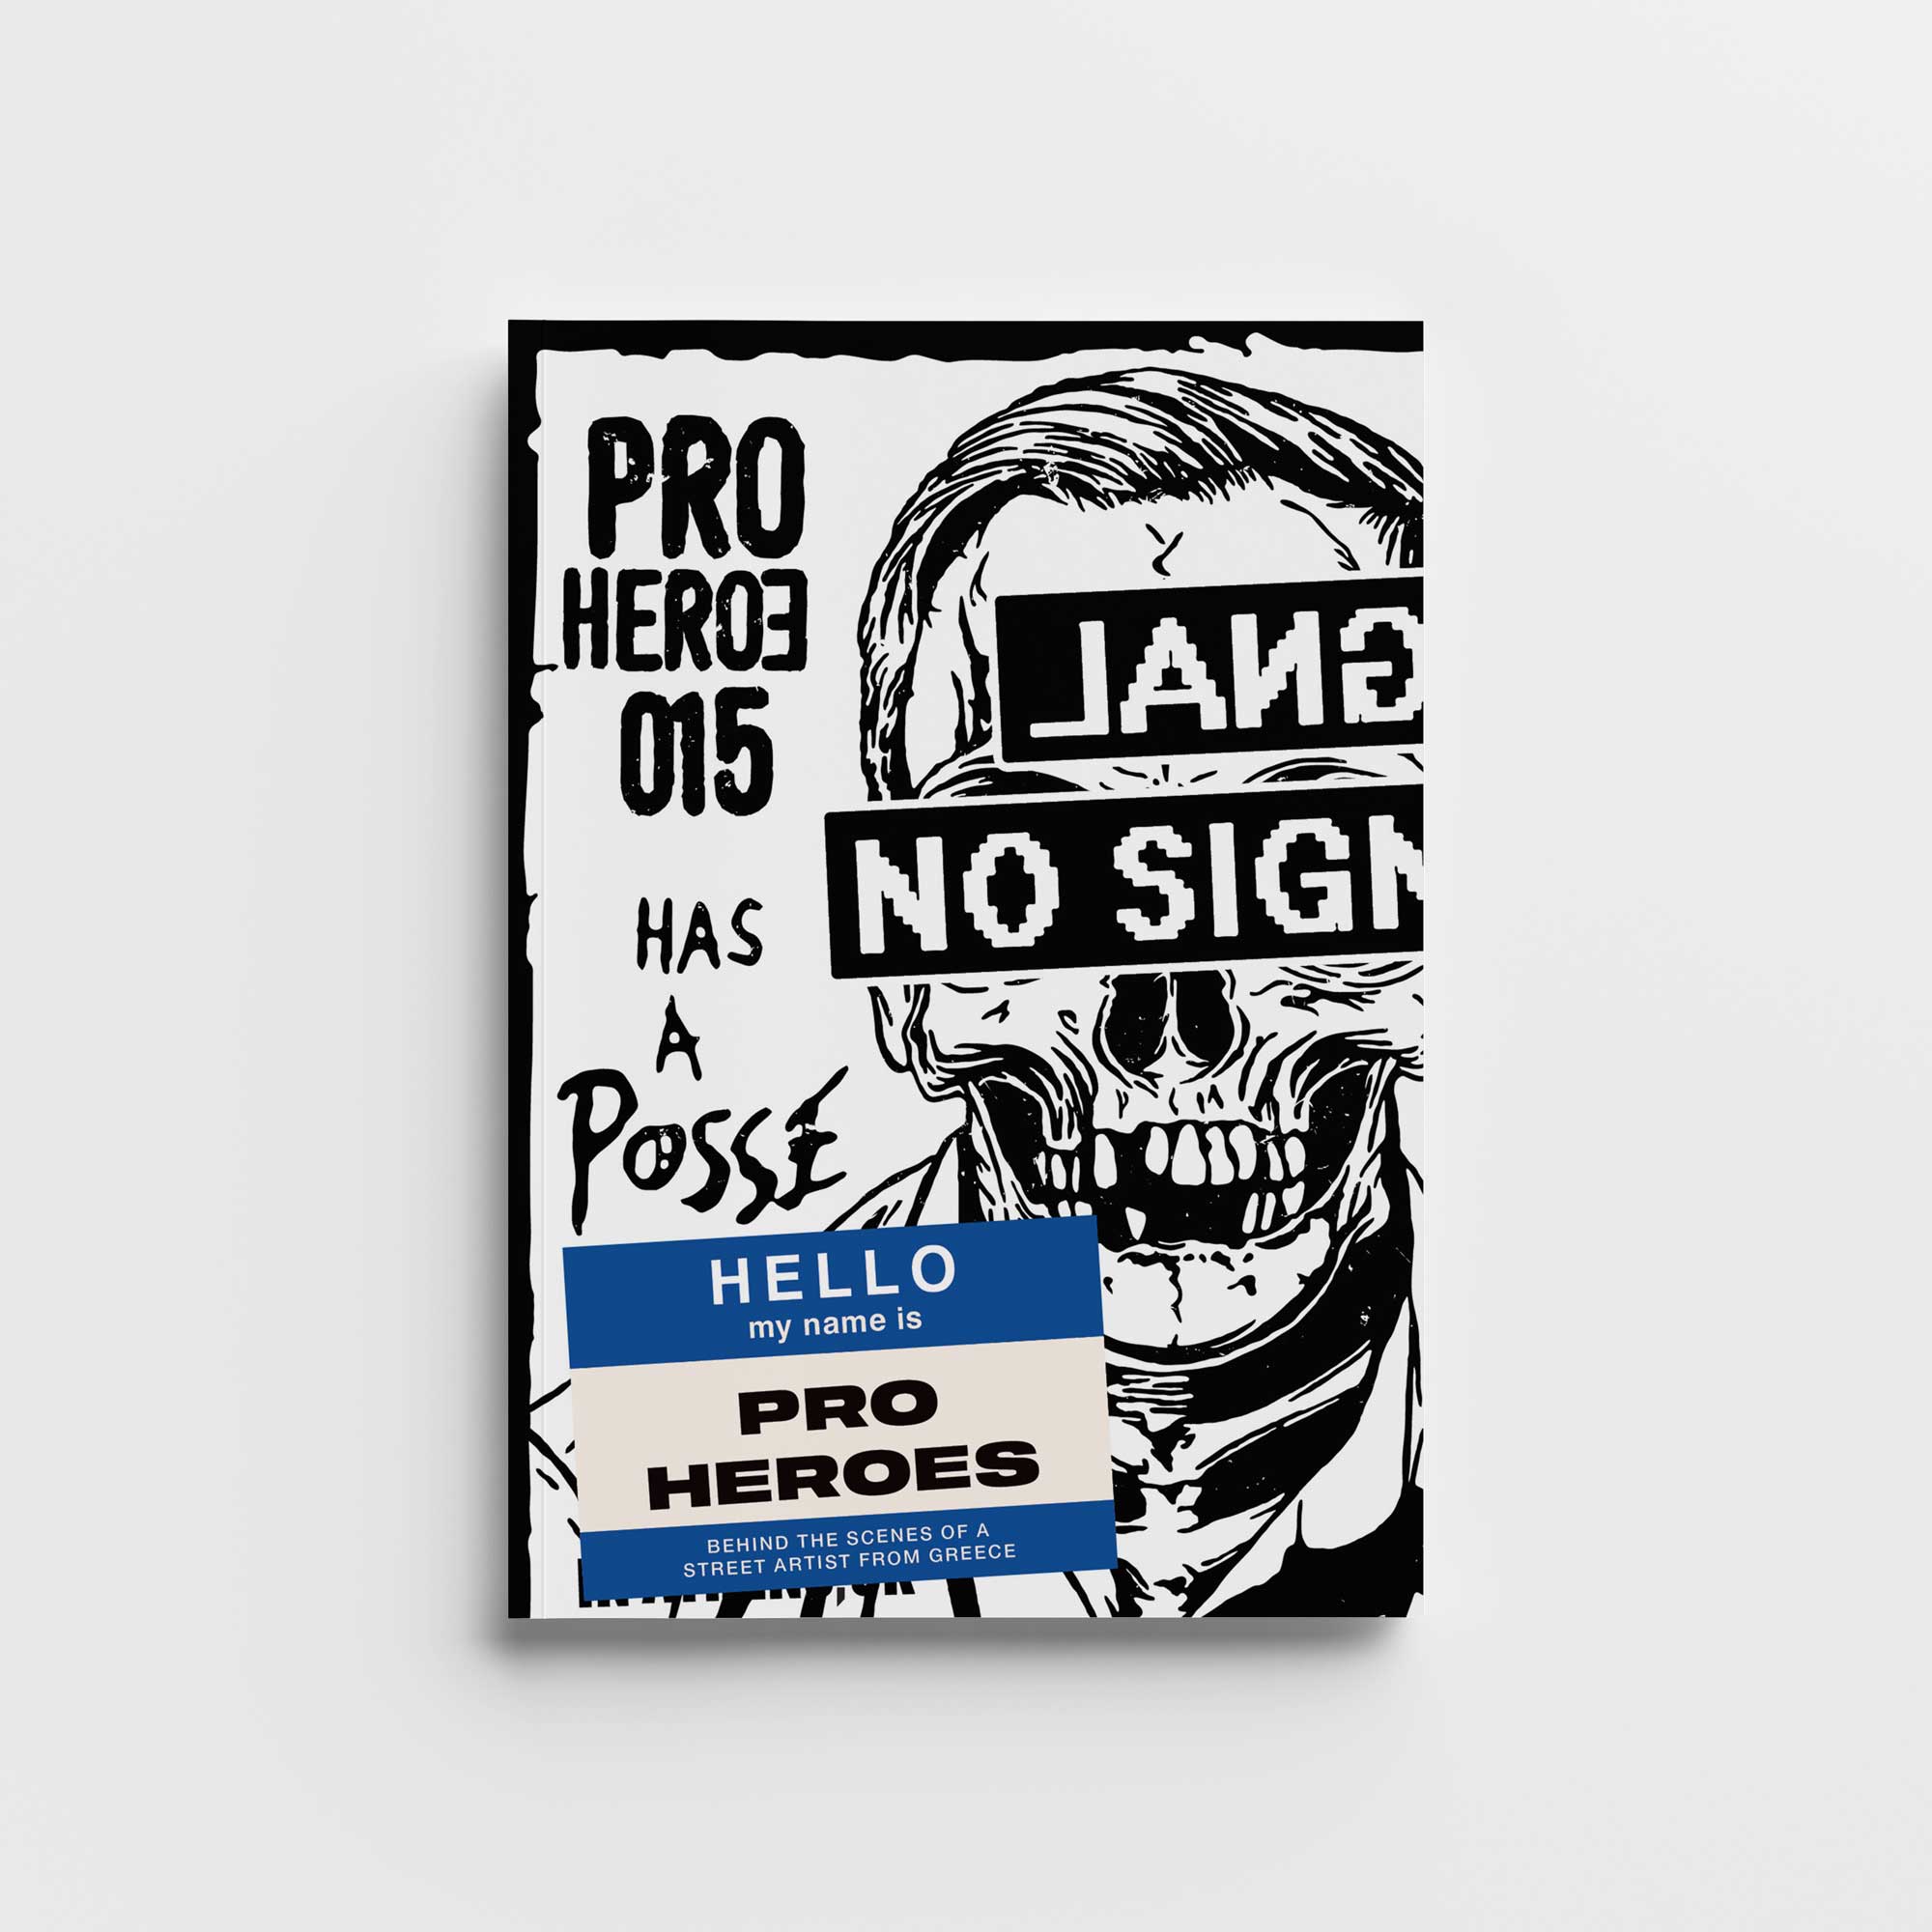 No Signal - Pro Heroes 015. Behind the scenes of a street artist from Greece